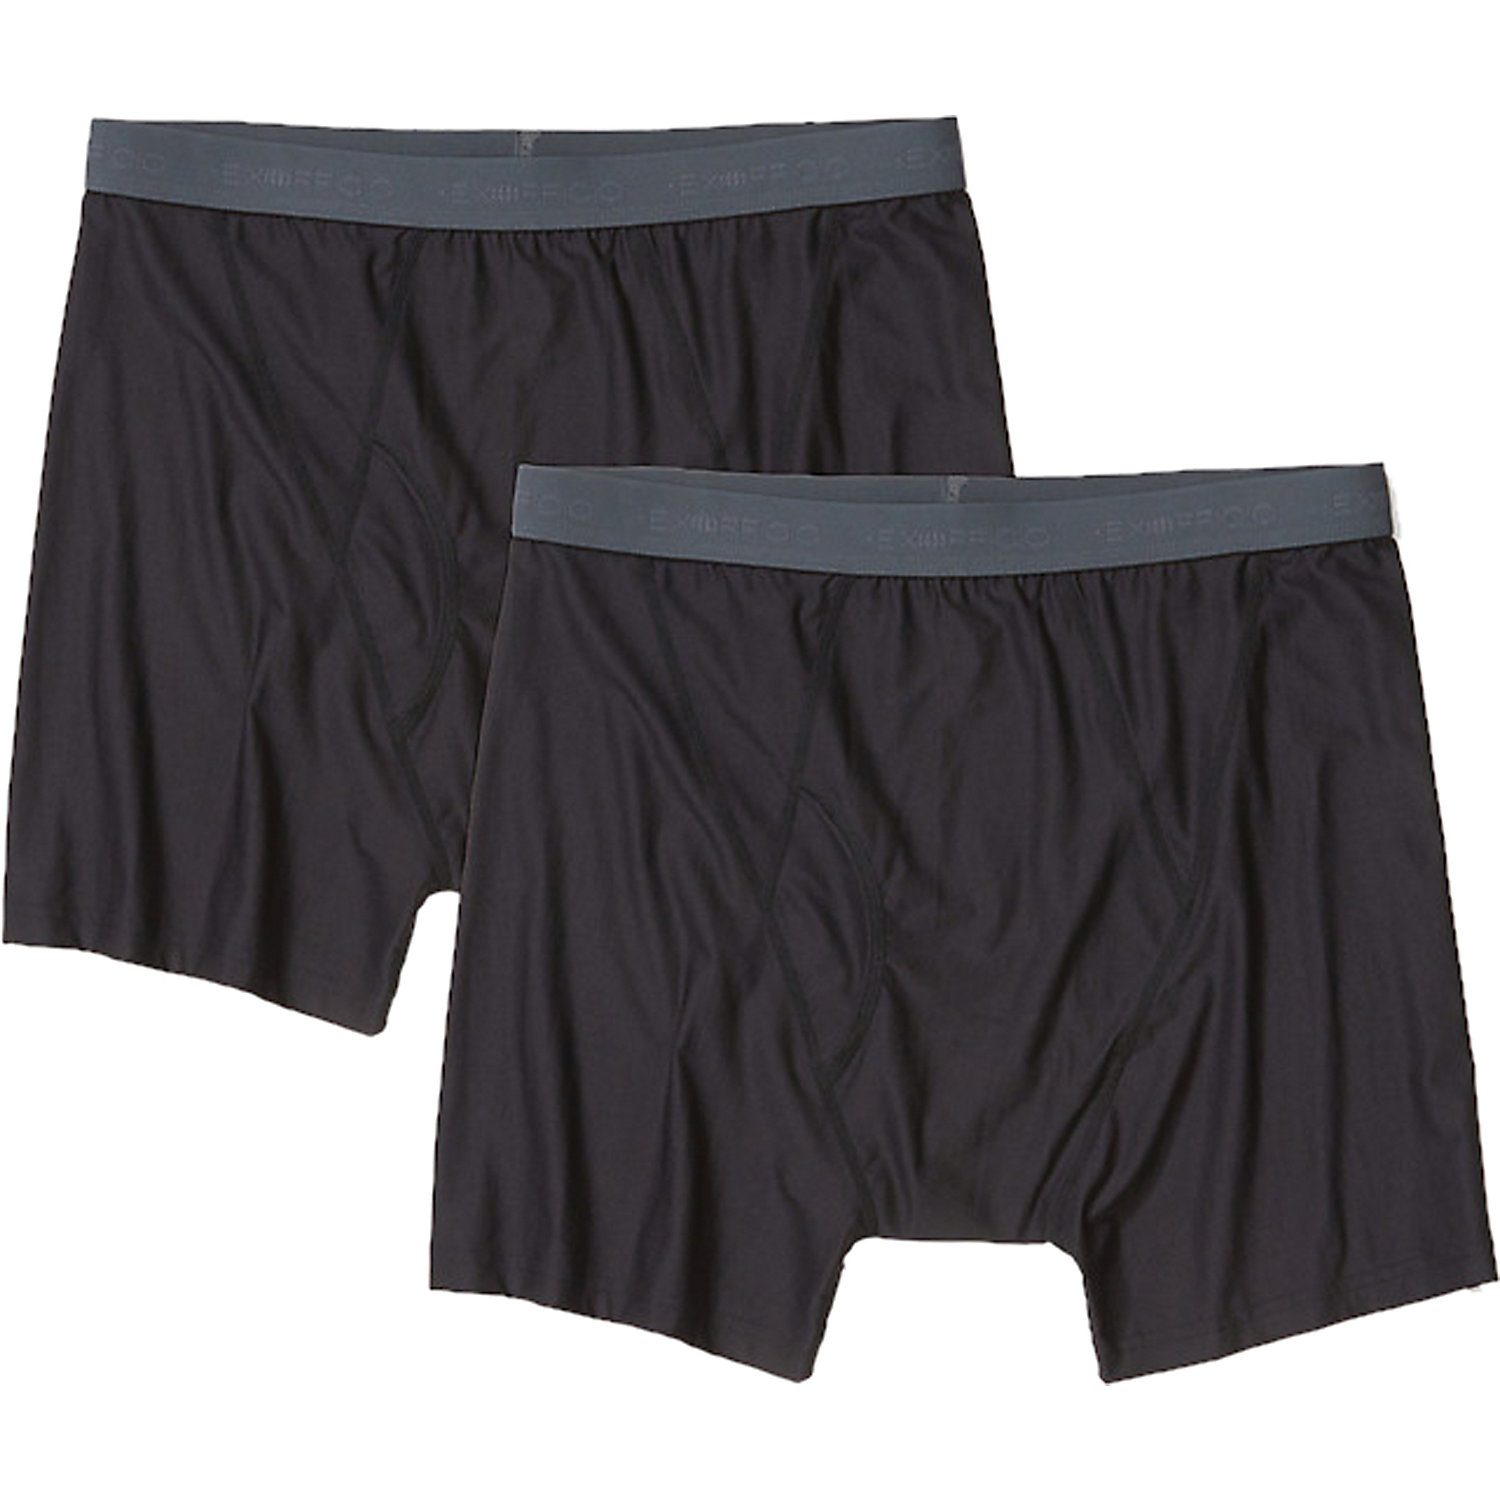 ExOfficio Mens Give-N-Go 2.0 Boxer Brief Two Pack